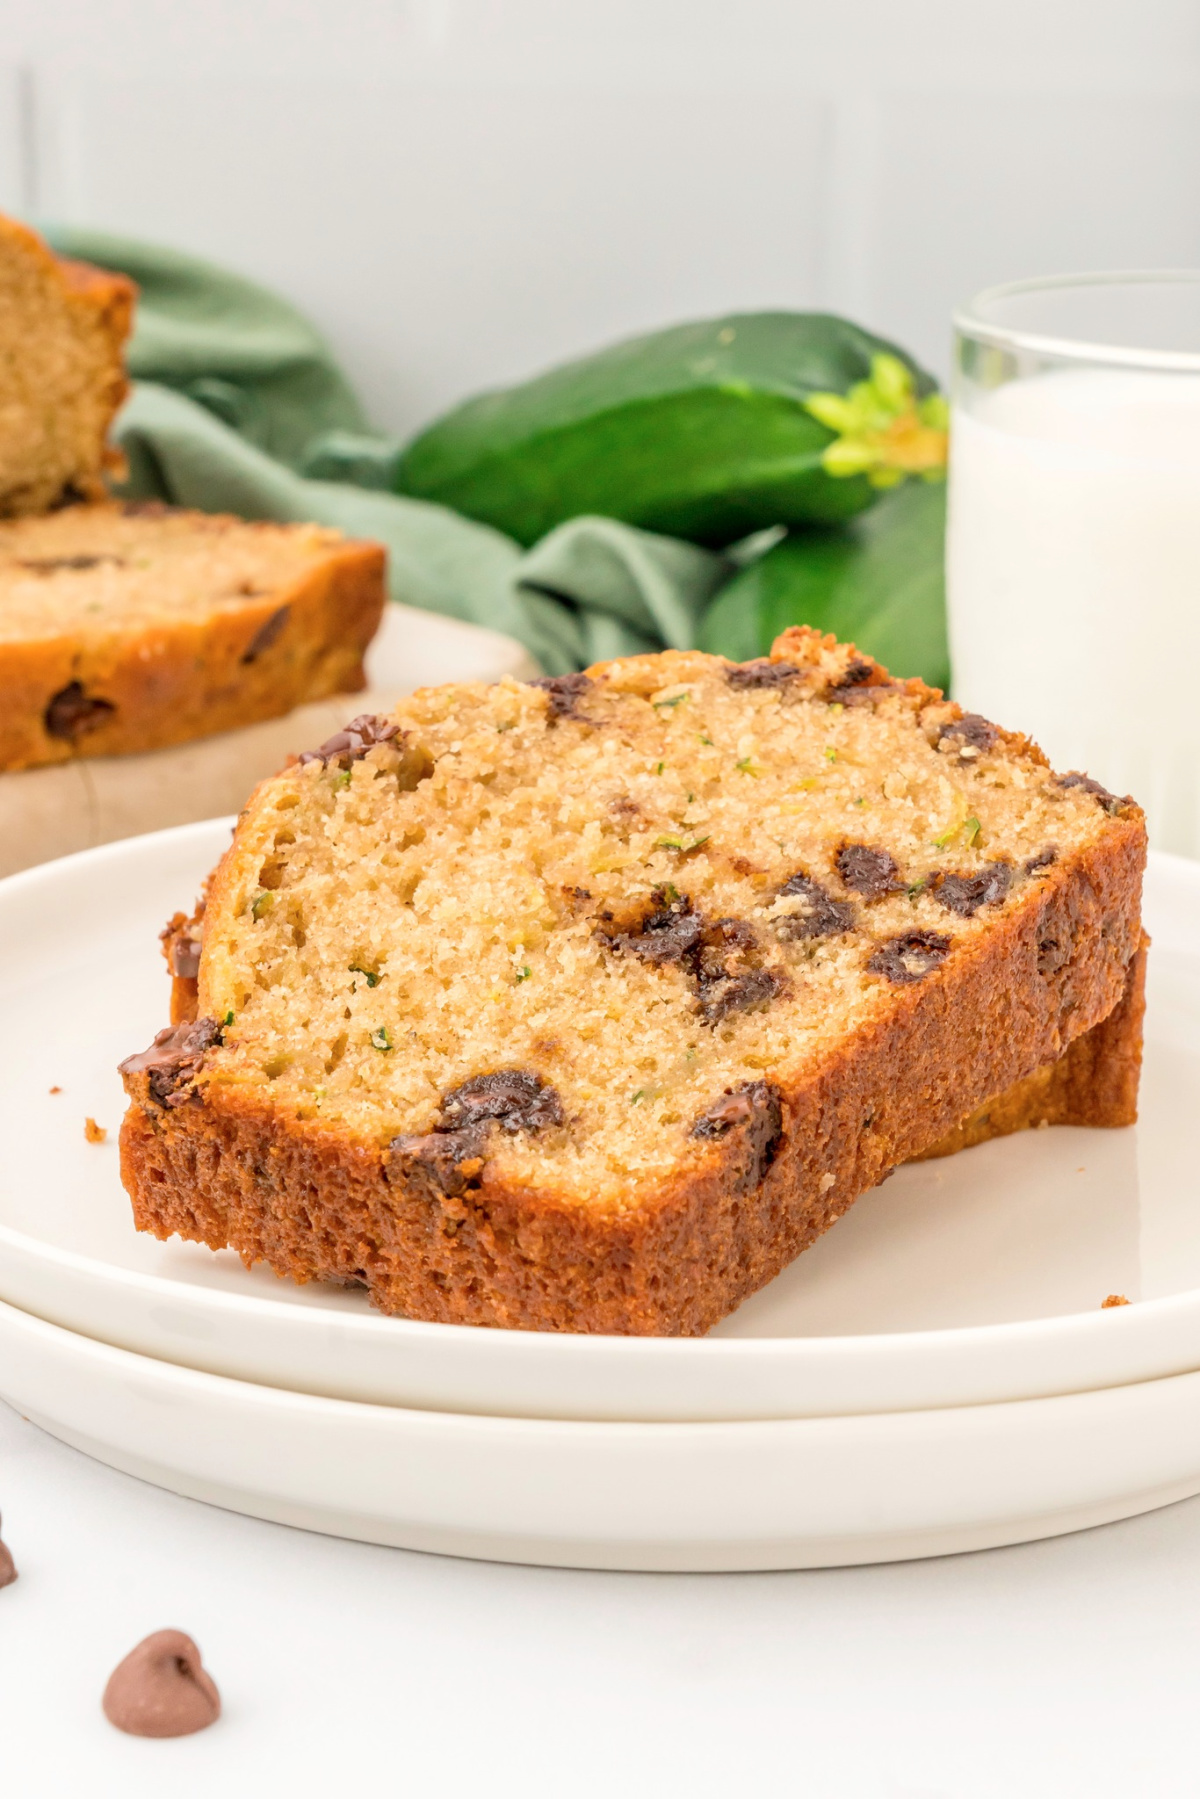 chocolate chip zucchini bread on a plate